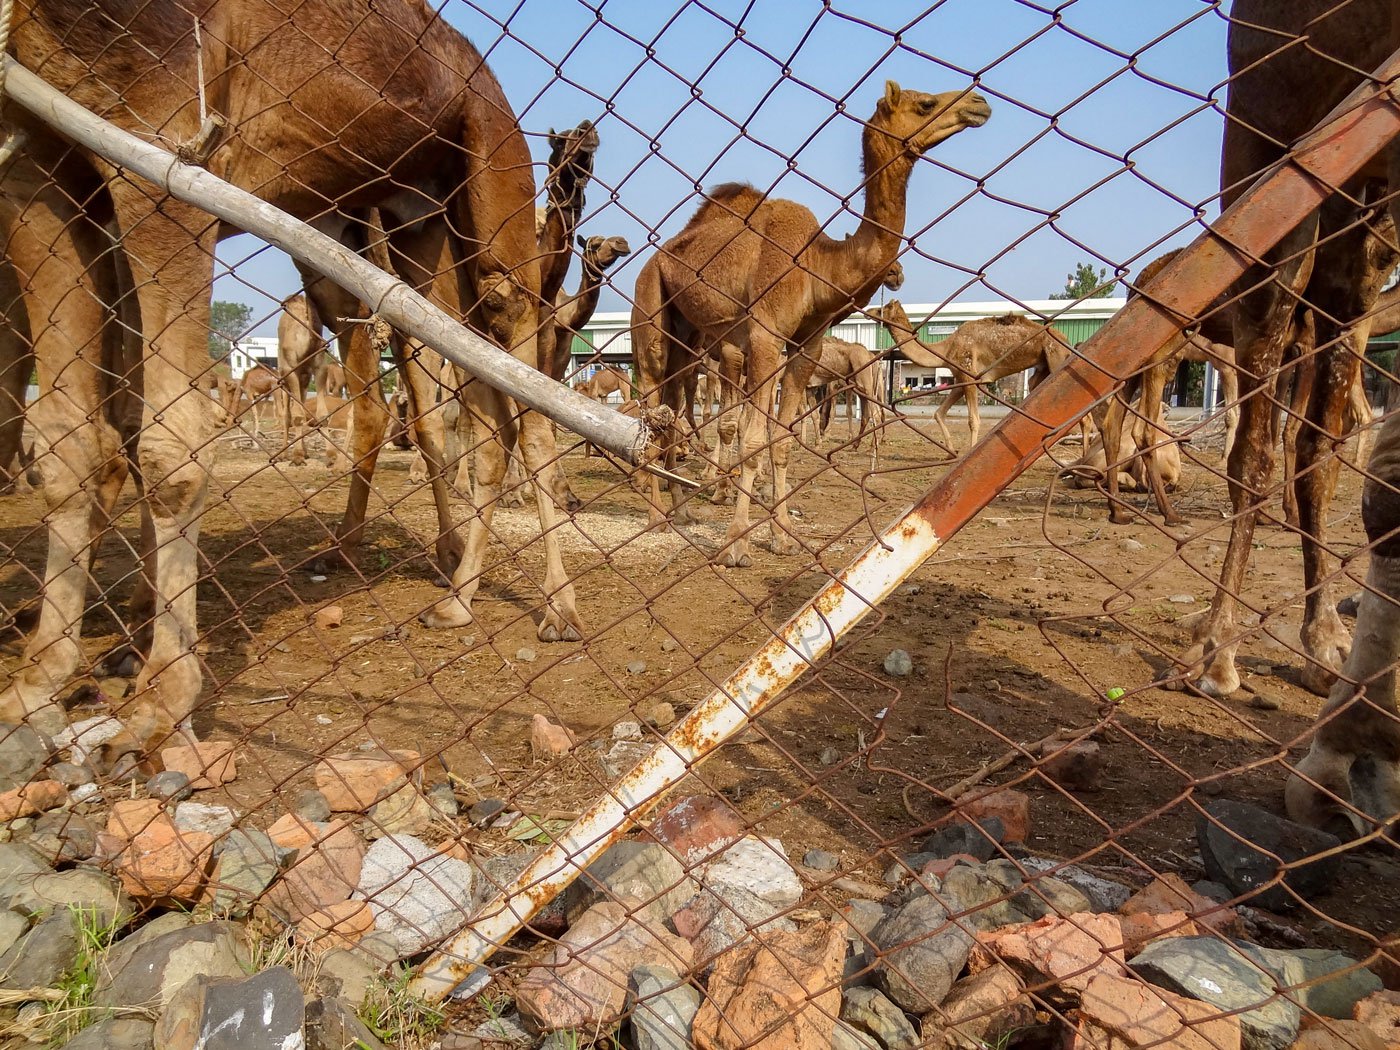 Kachchh camels' custody: ships of the deserted